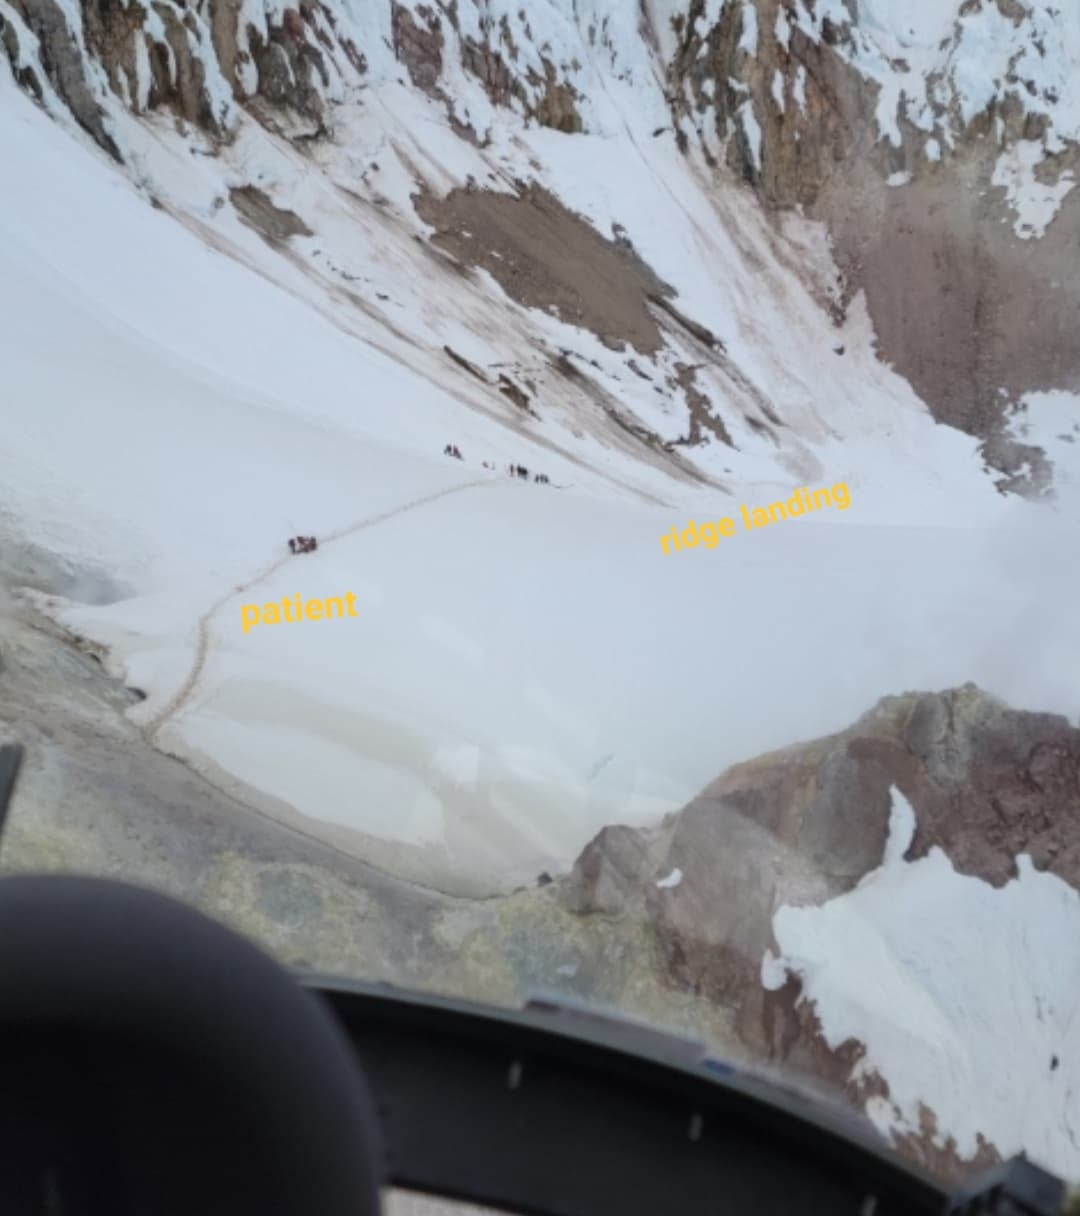 The view from the Black Hawk cockpit shortly after taking off from a precarious ridgeline landing site to drop off medics to care for a mountain climber in need of treatment. (Photo courtesy Chief Warrant Officer 3 Michael Newgard)